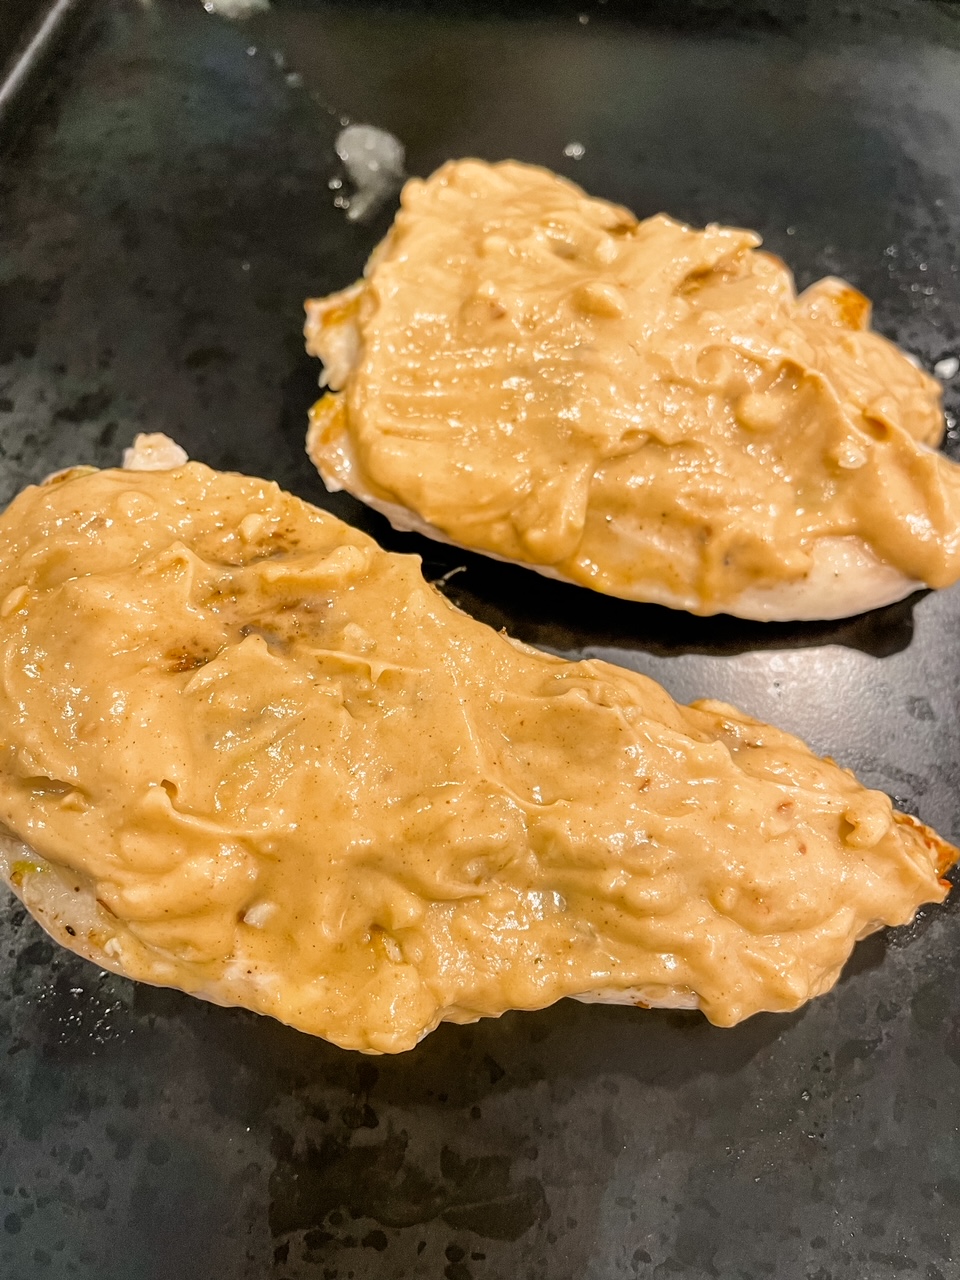 Two chicken breasts topped with the peanut mixture prior to cooking